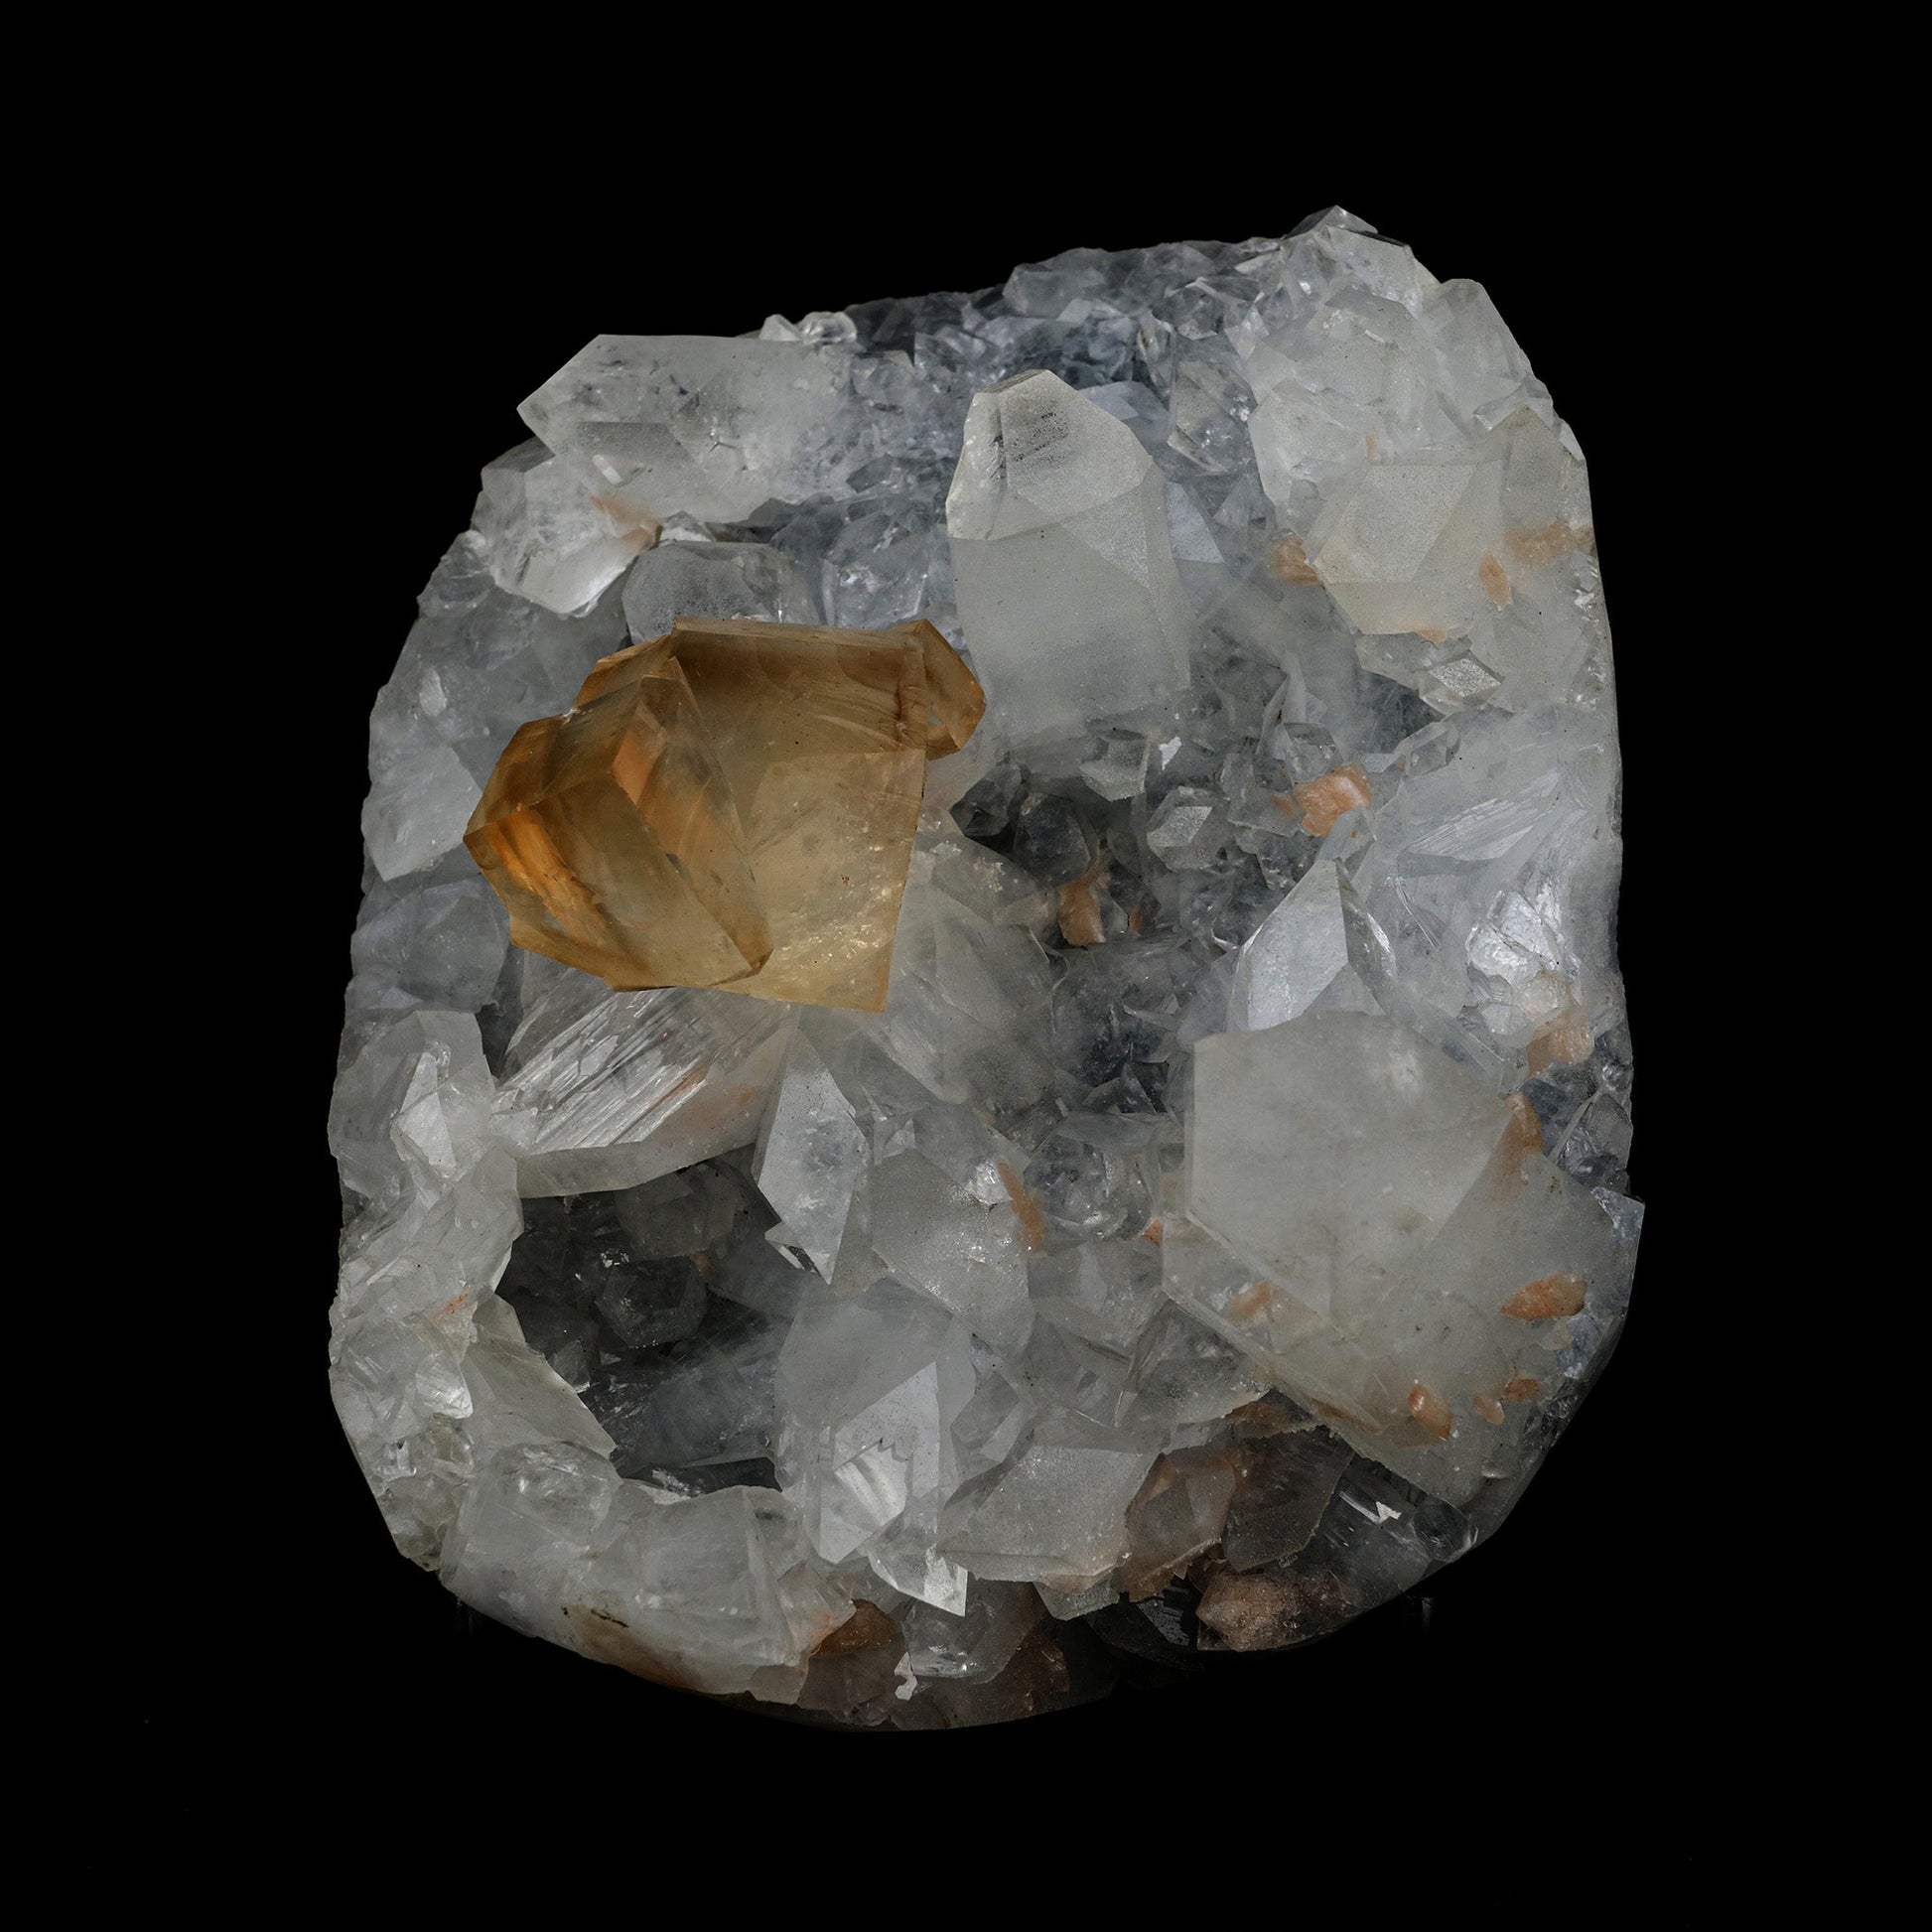 Golden Calcite with Apophyllite Natural Mineral Specimen # B 5170  https://www.superbminerals.us/products/golden-calcite-with-apophyllite-natural-mineral-specimen-b-5170  Features: An extremely aesthetic piece that features a matrix Coated Calcite hosting a couple of complex, lustrous, water clear Calcite crystal with intersecting, perfectly formed pink-orange Stilbite crystals. The crystal formation, color, contrast, luster and symmetry are amazing! It also stands on its own. In excell